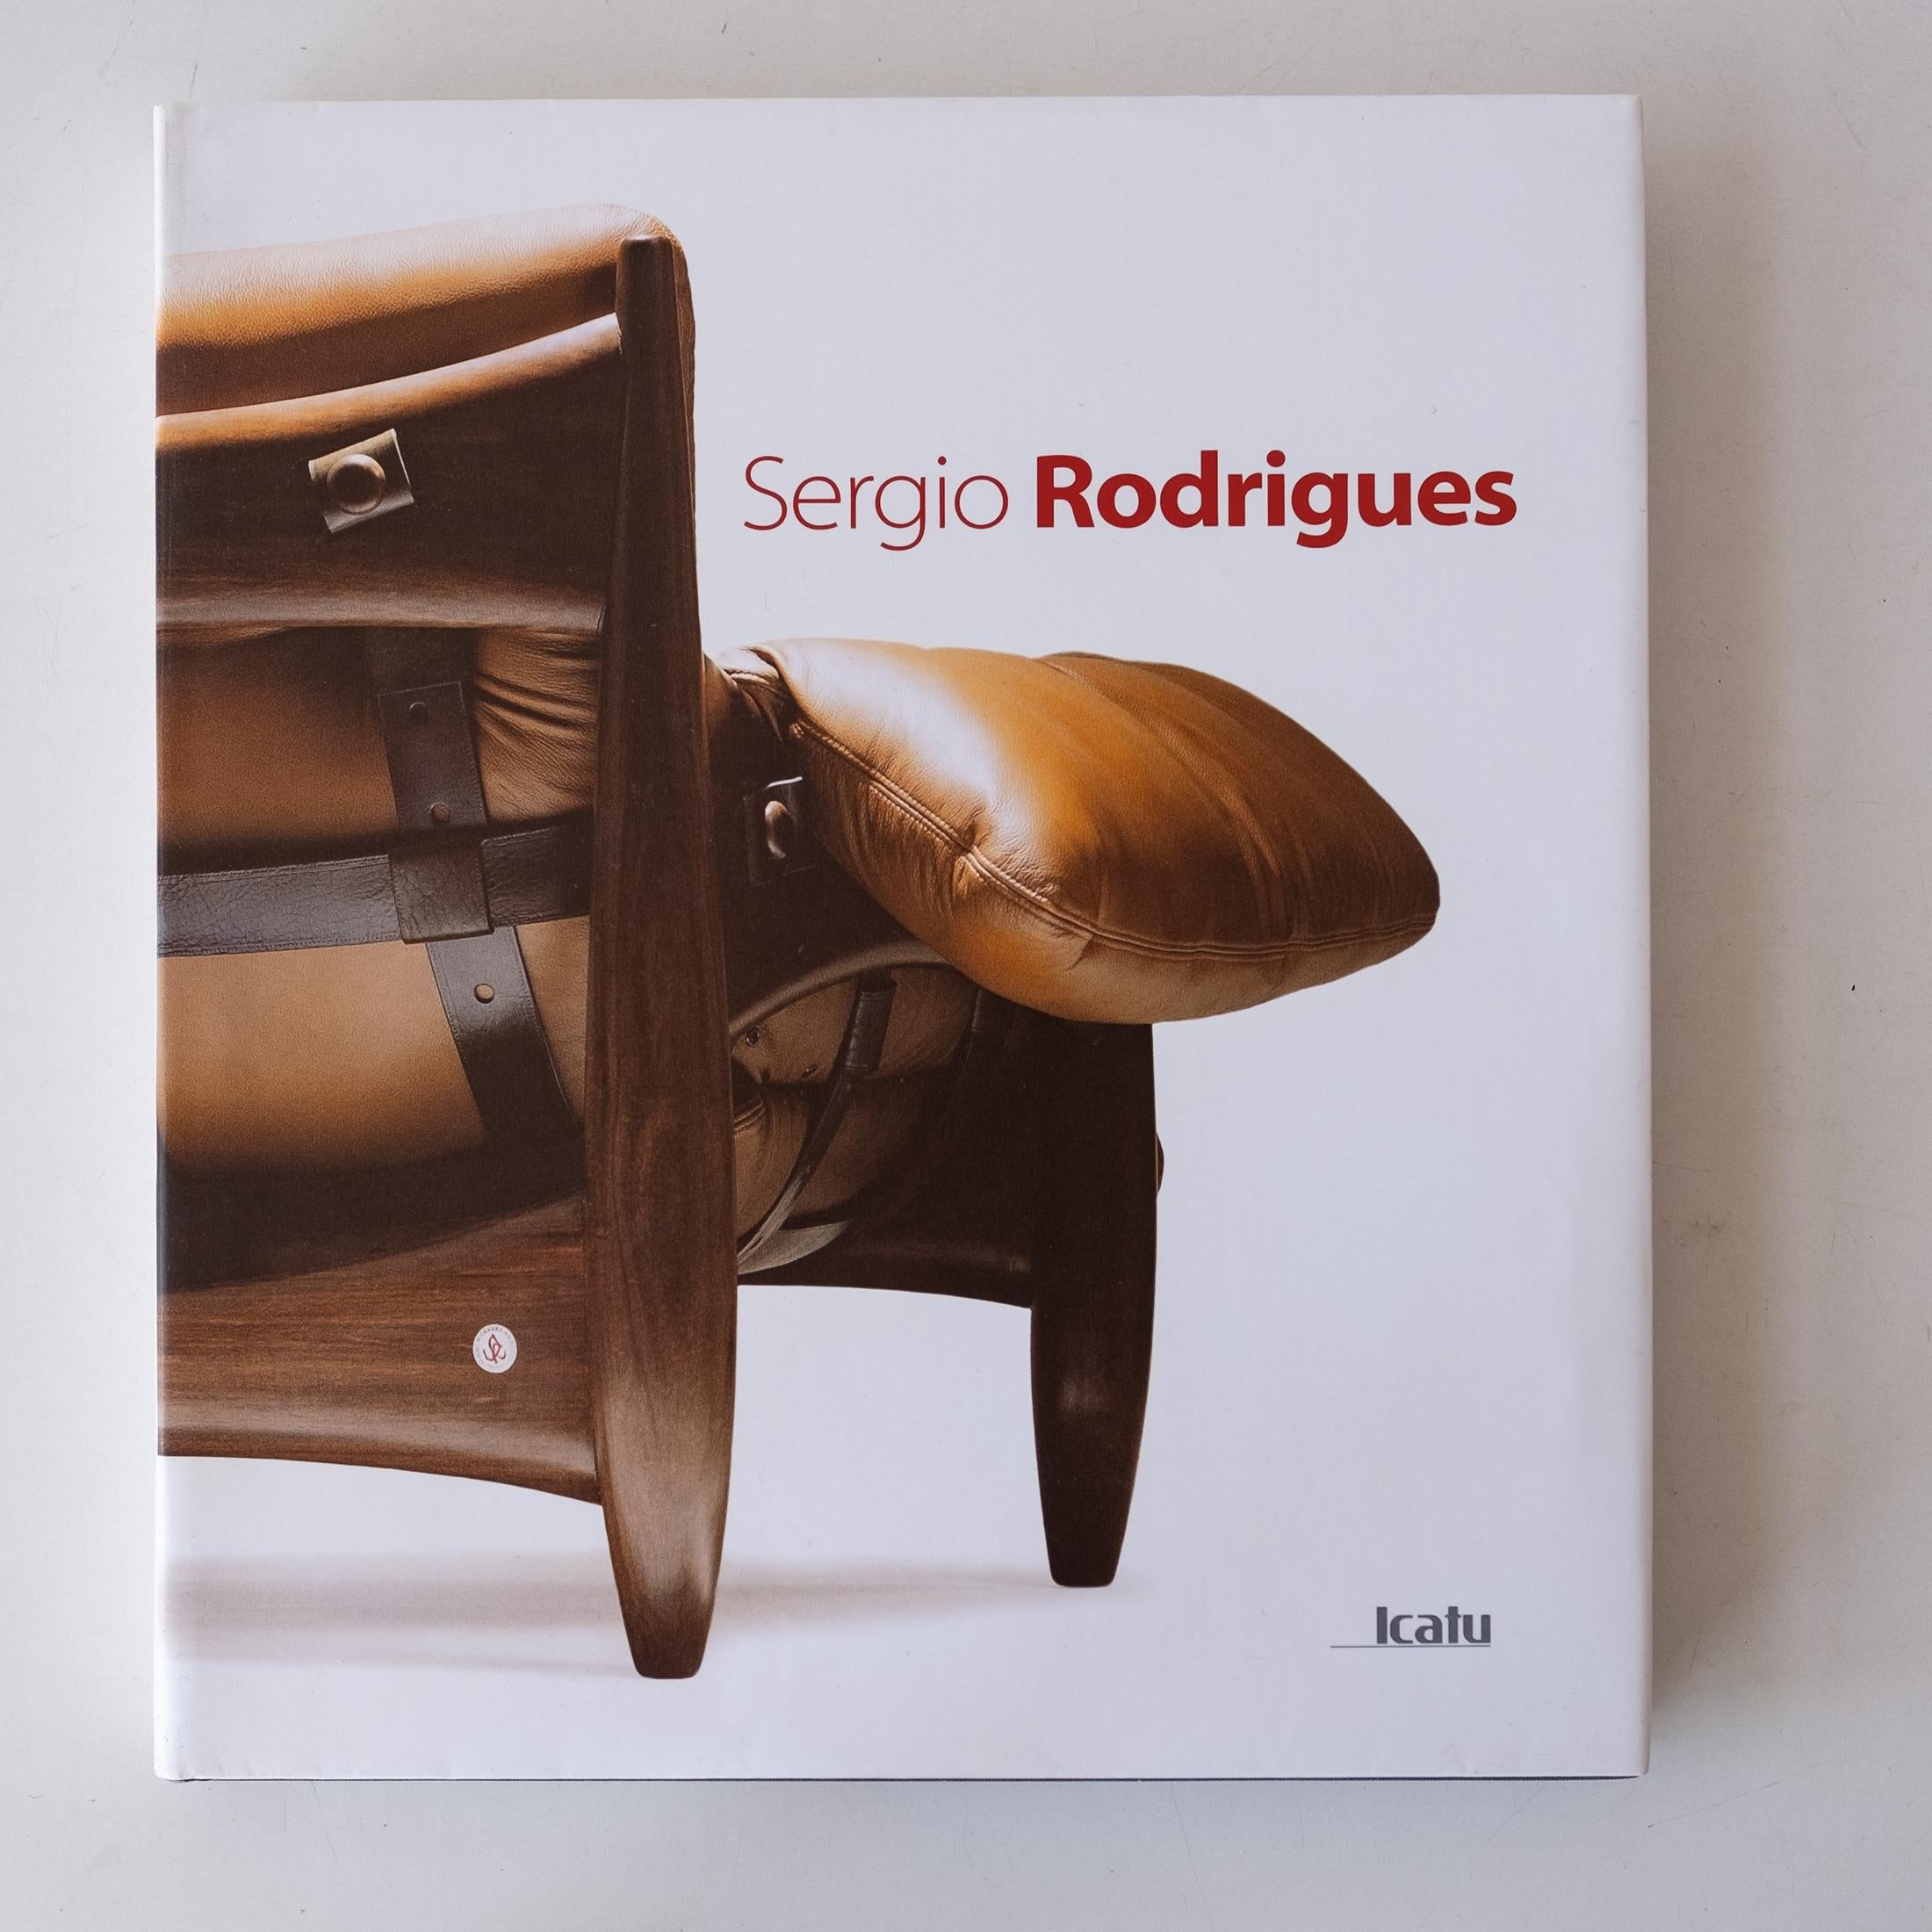 Sergio Rodrigues monograph edited by Soraia Cals. This is the most extensive book on the Brazilian designer and architect. An incredible amount of photos on his furniture, architecture and life. There is an extensive furniture index referencing an